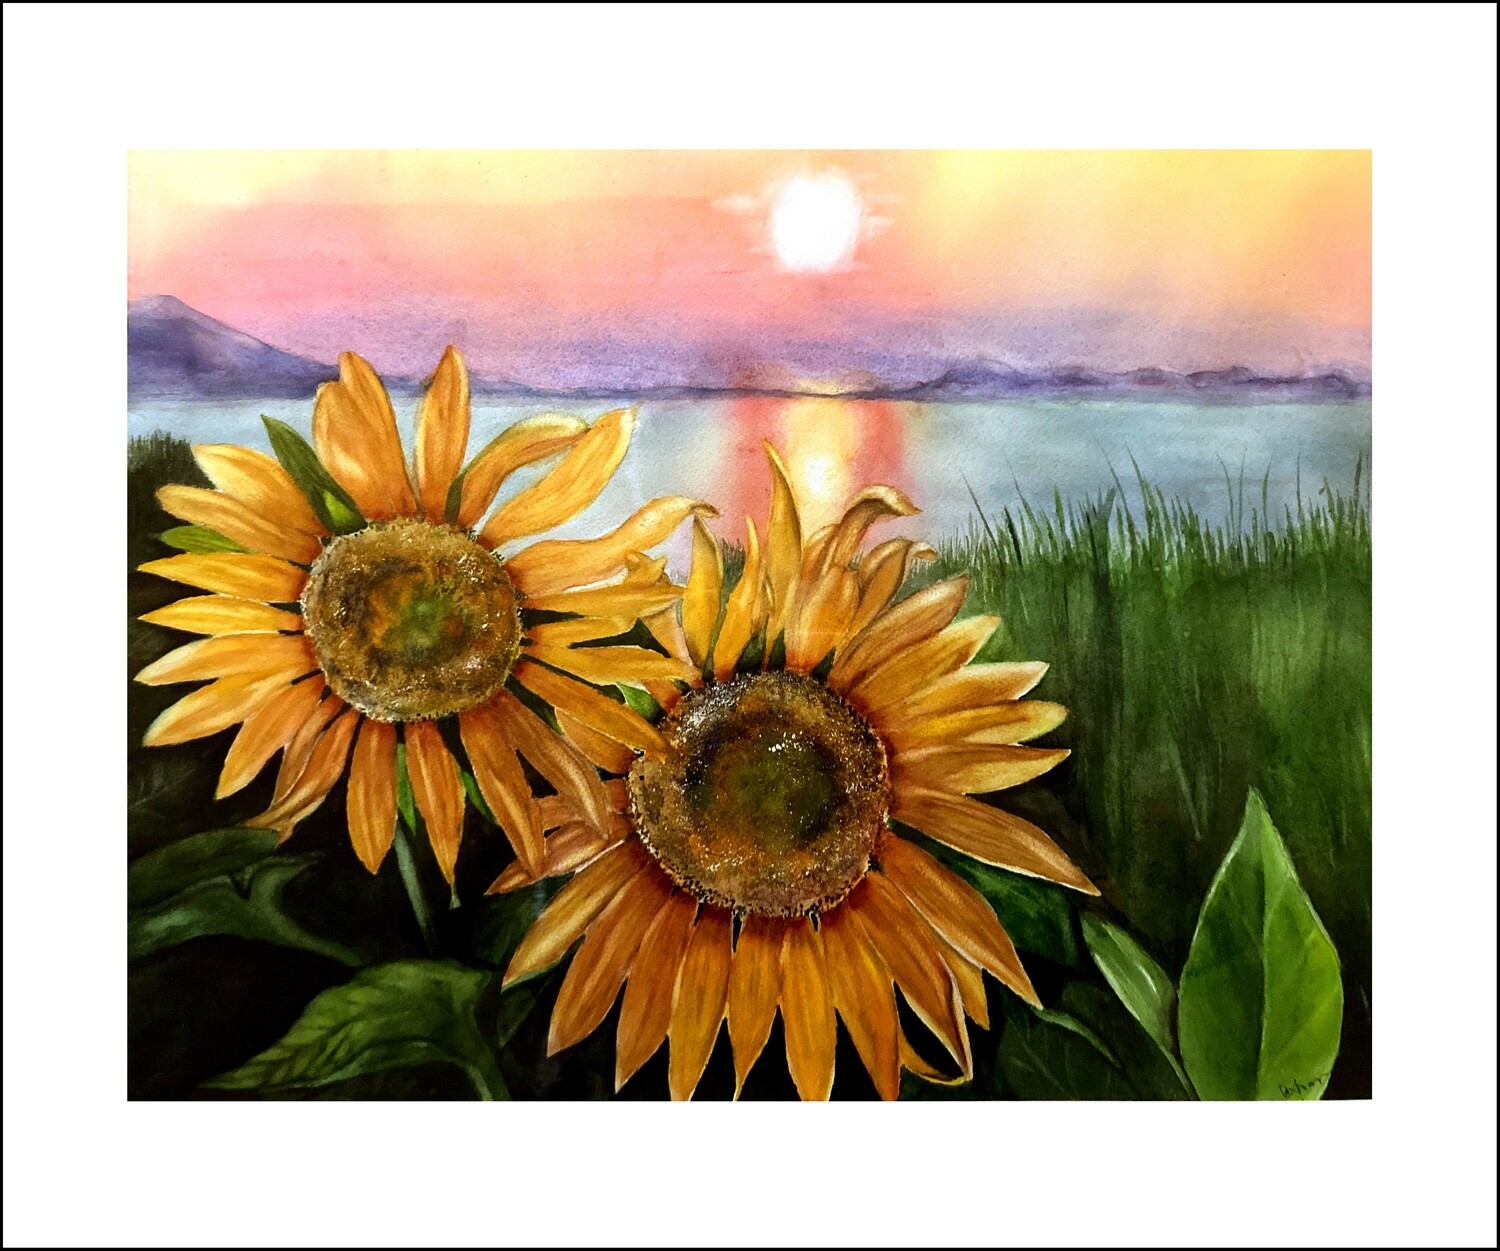 "Sunflowers for Peace" by Cathy Francis